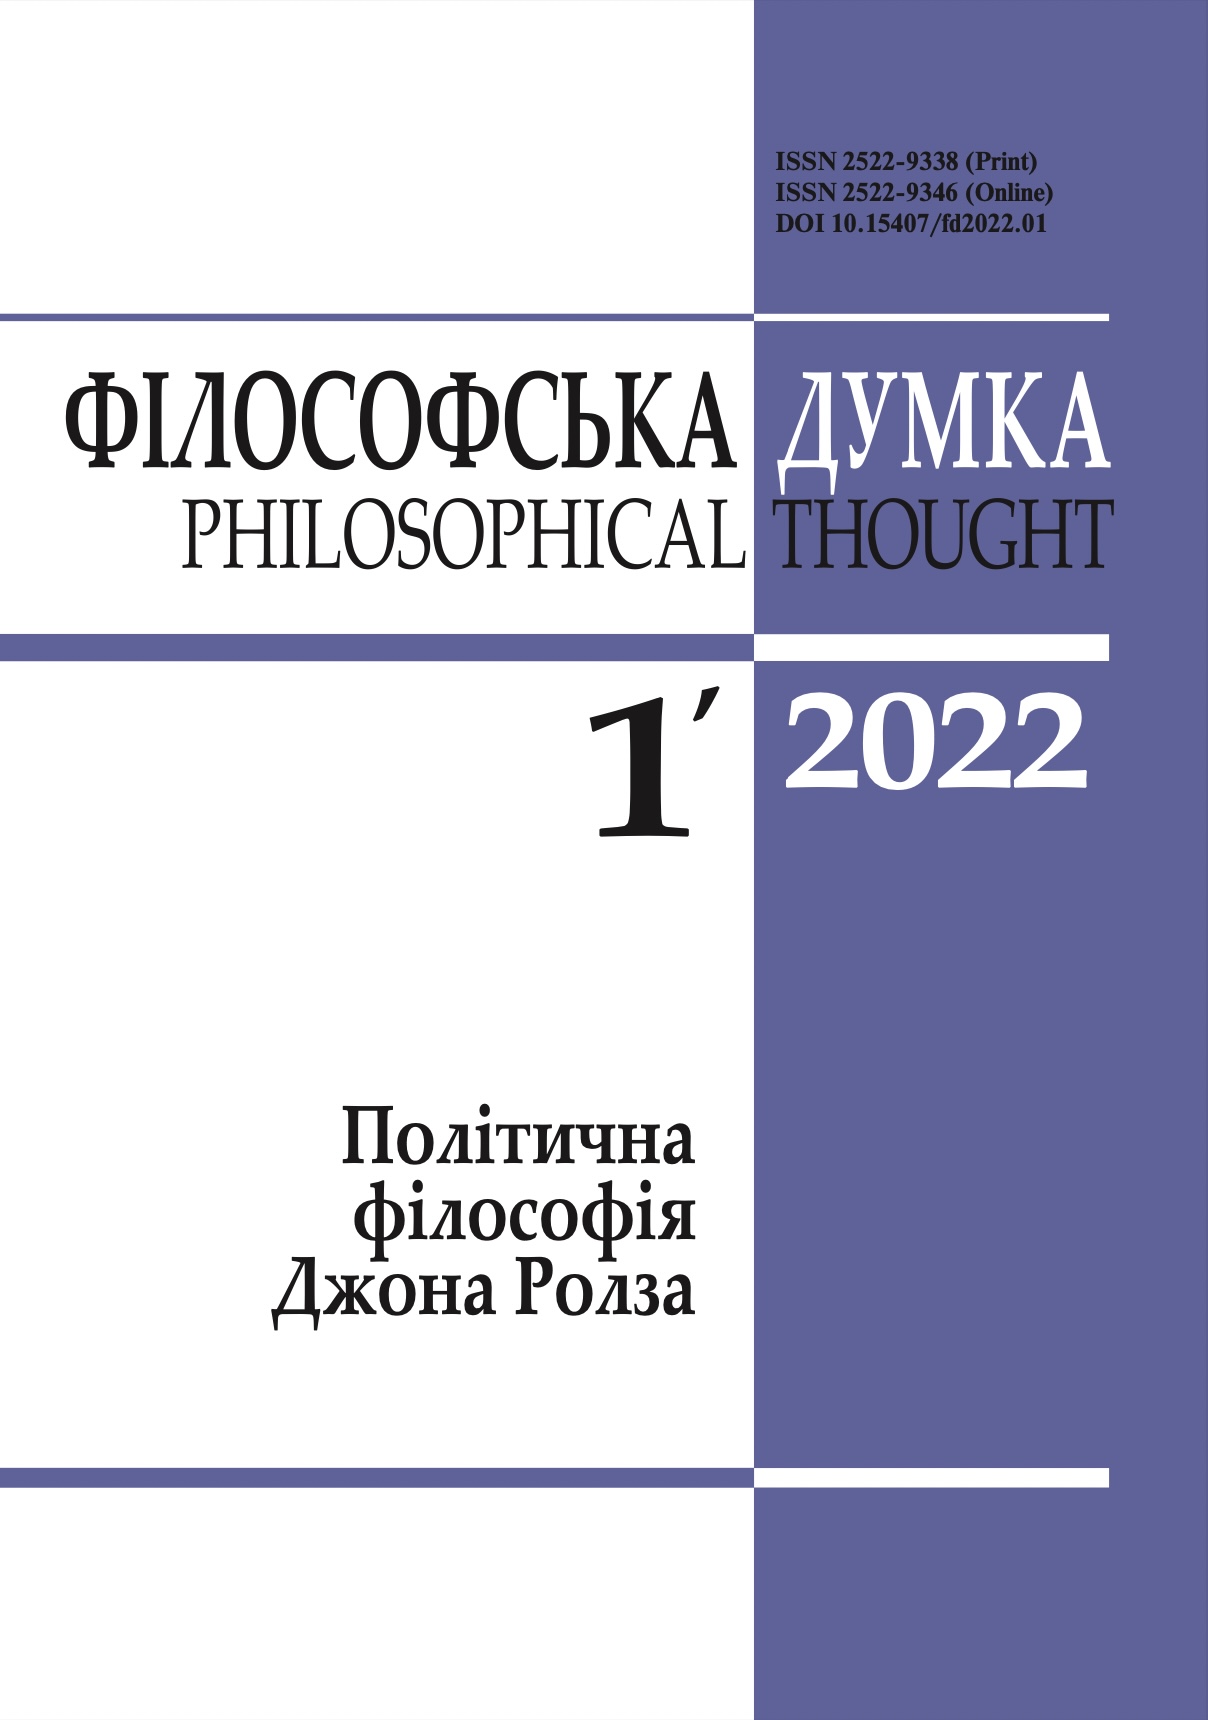 					View No. 1 (2022): Philosophical thought
				